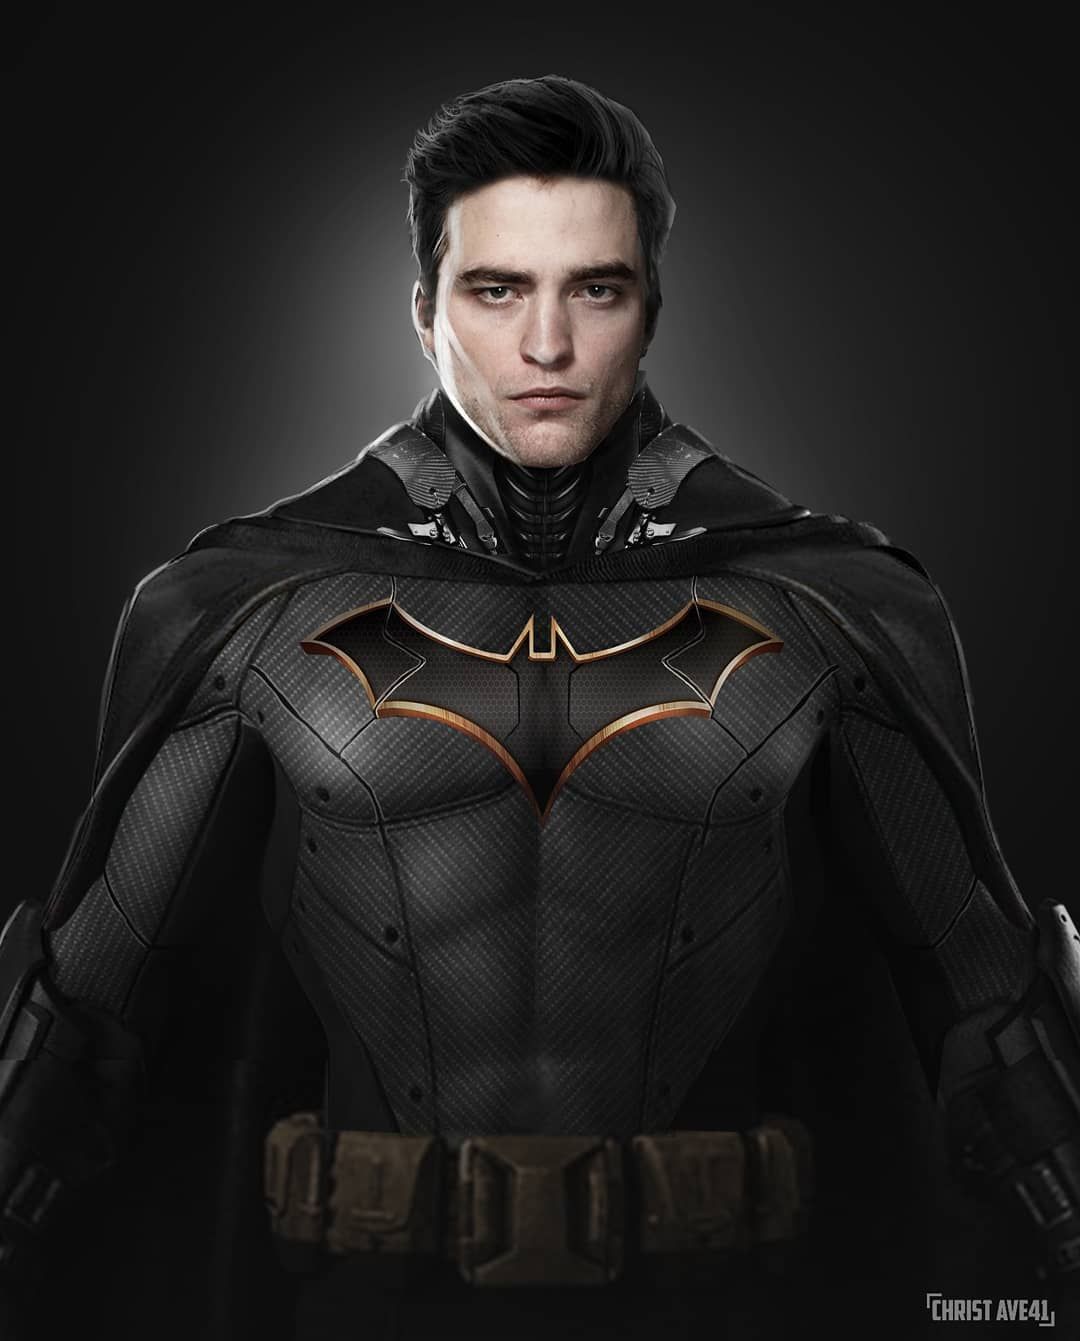 The full preview of the batsuit from my previous poster of Robert